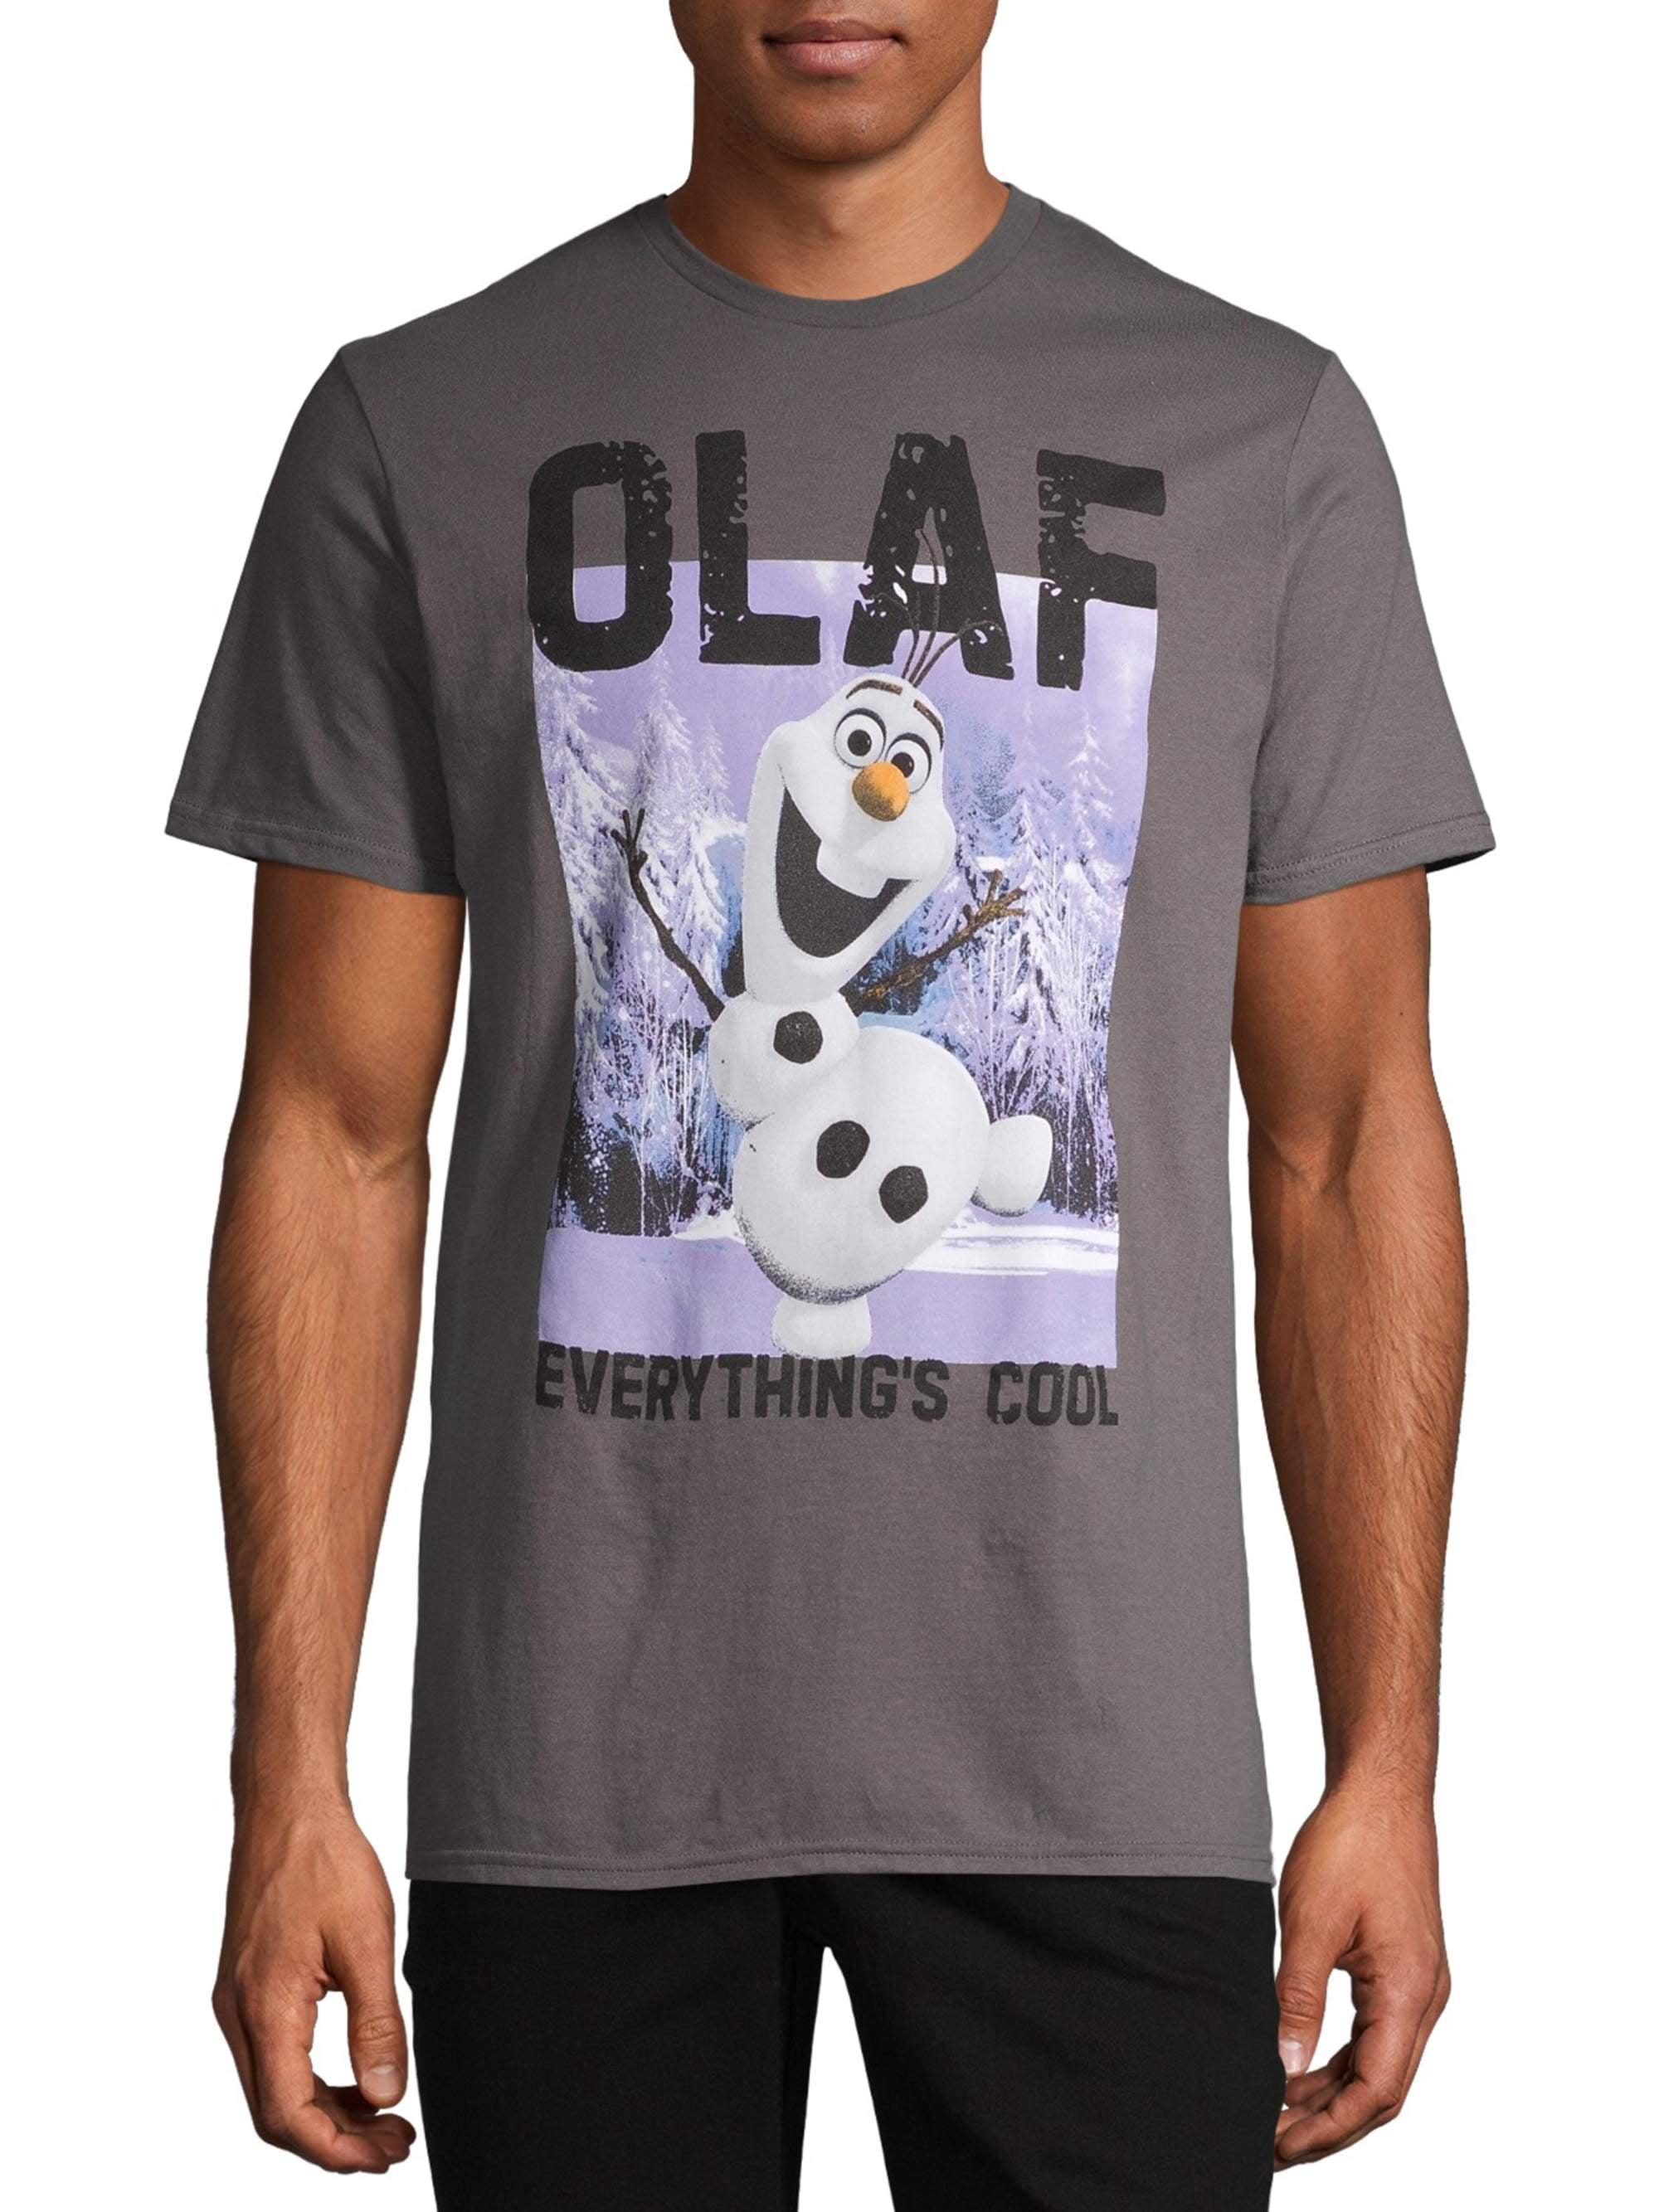 frozen shirts for adults